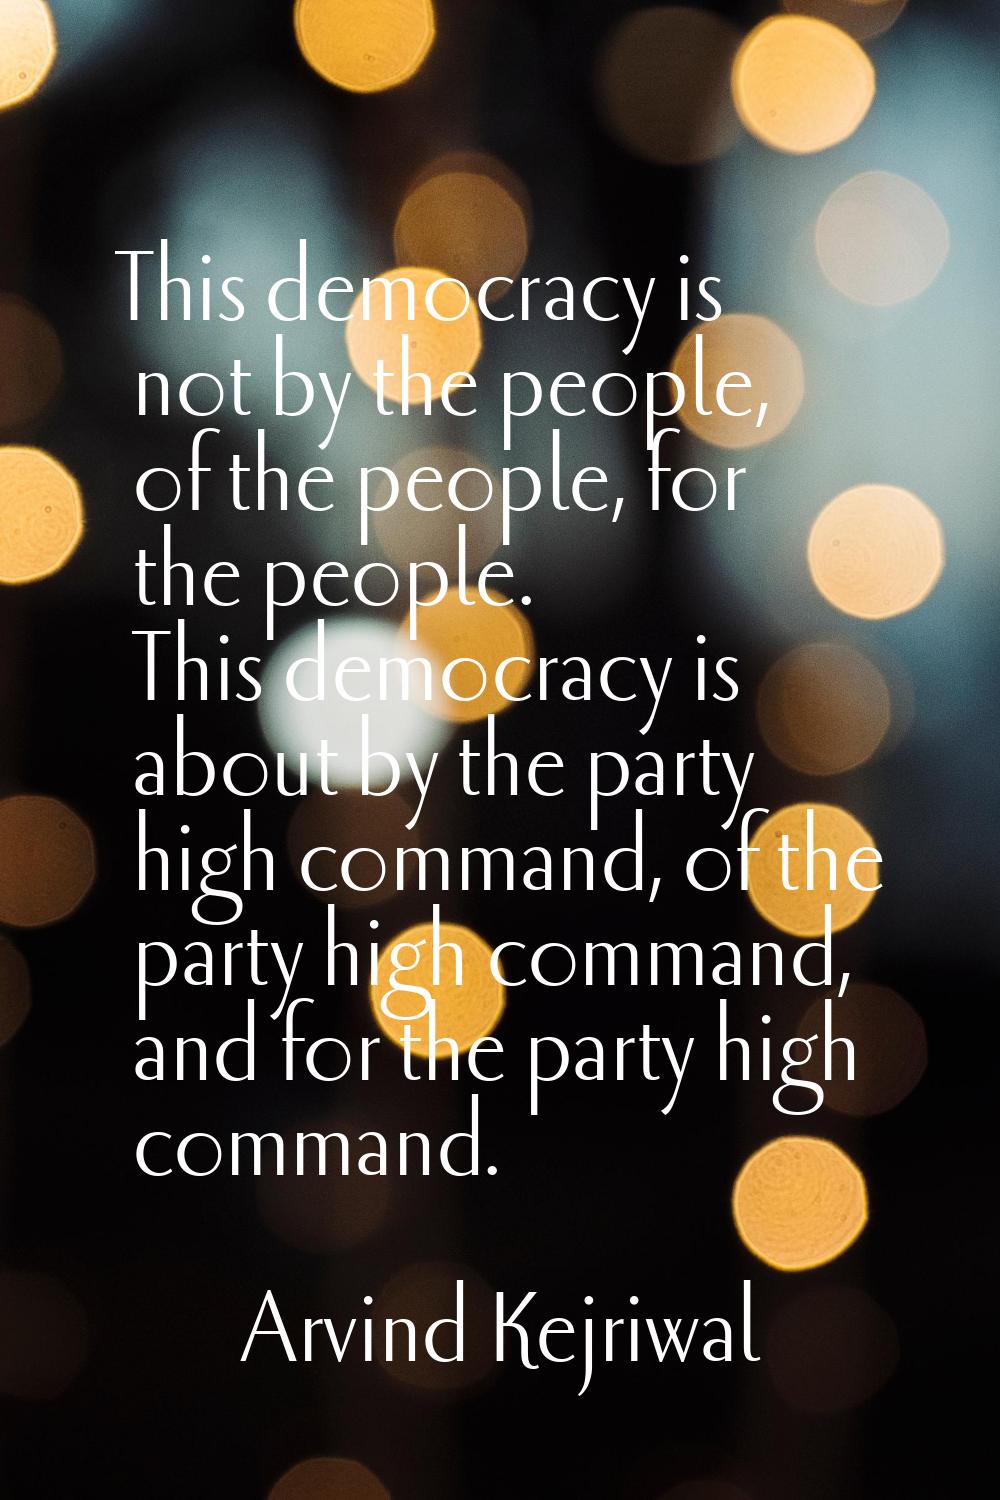 This democracy is not by the people, of the people, for the people. This democracy is about by the 